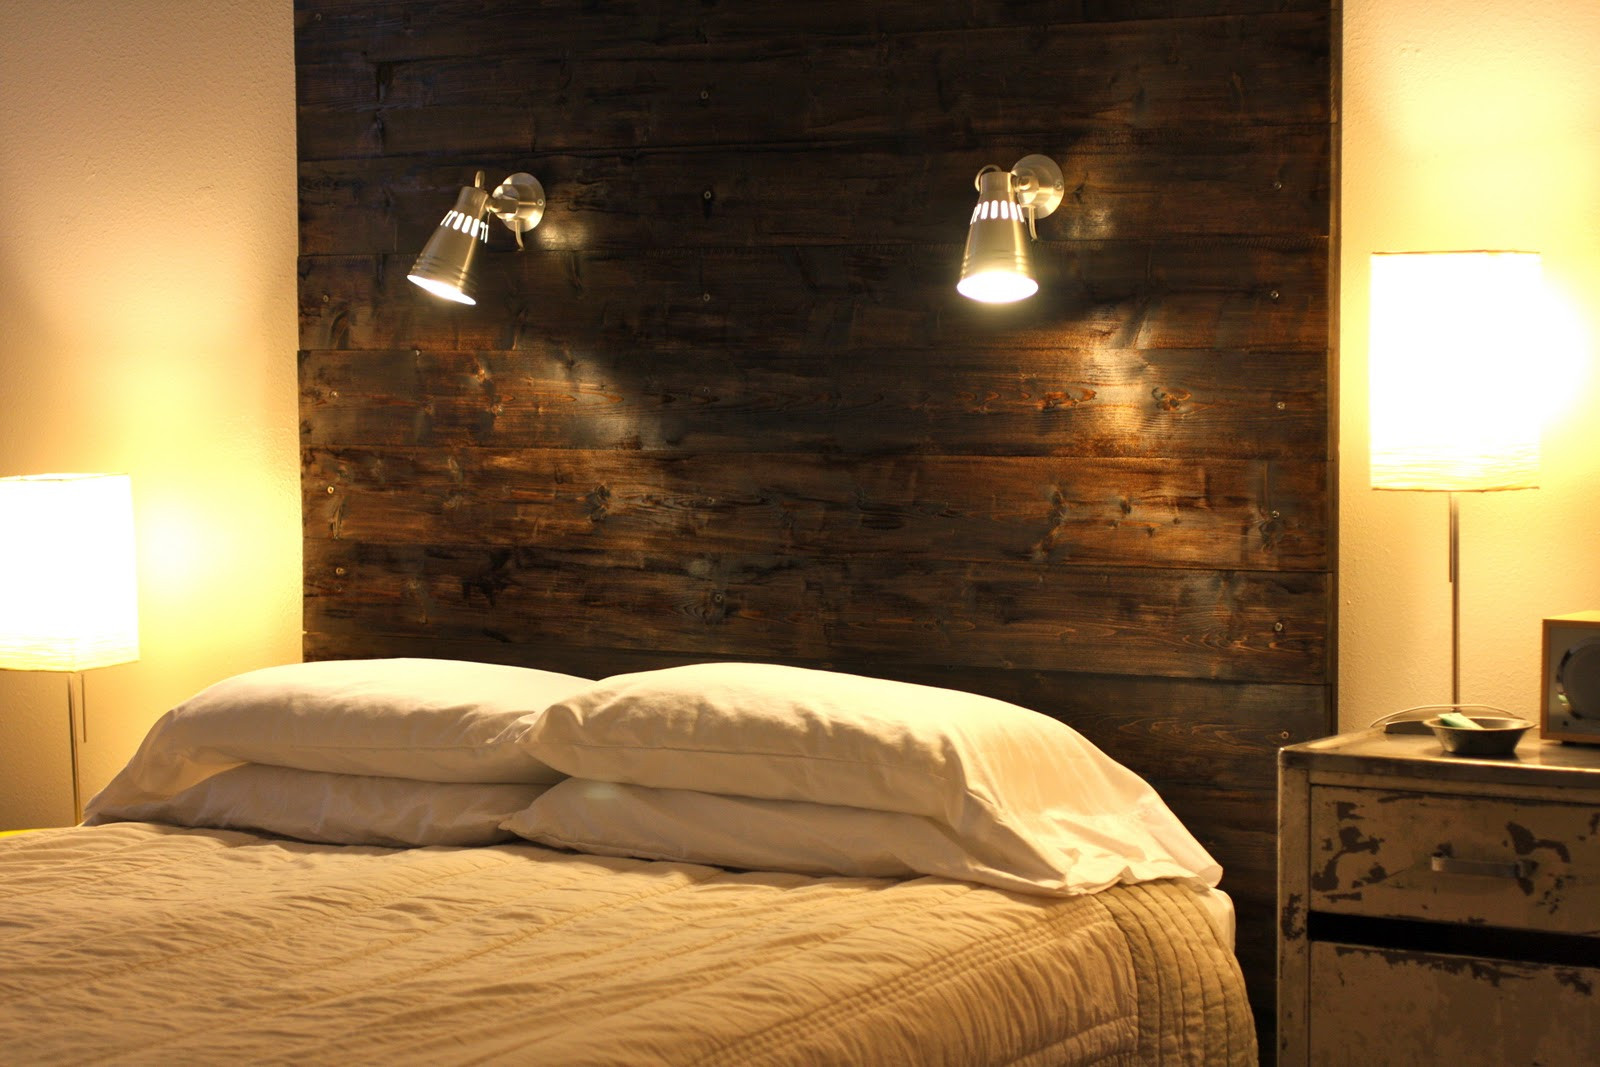 DIY Wooden Headboard With Lights
 the headboard CH and I built